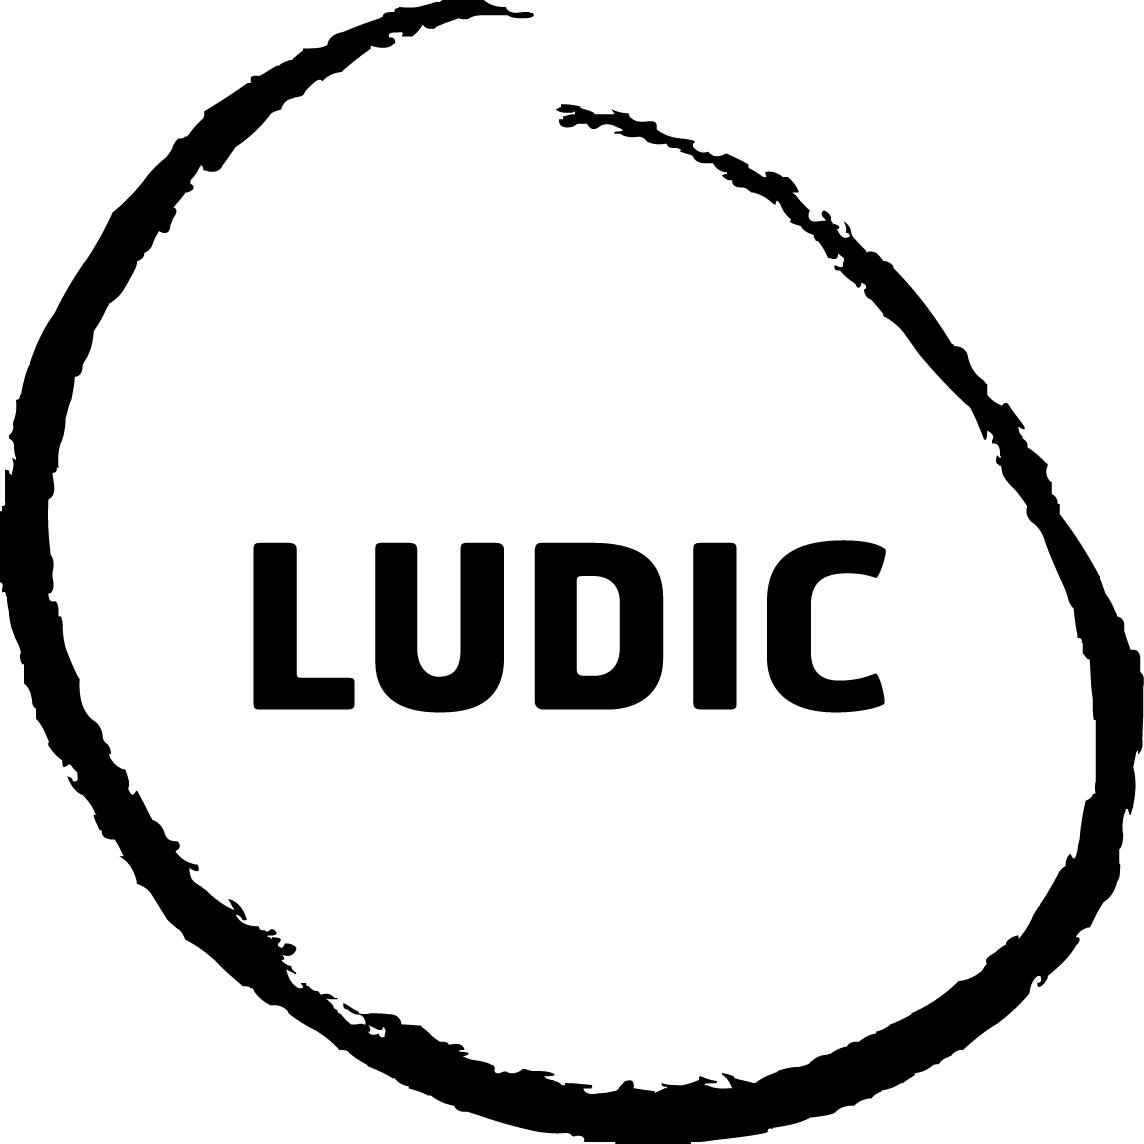 LUDIC_LOGO_BLACK_new Strategic Visioning and Solution Design Blended Event - Ludic Consulting